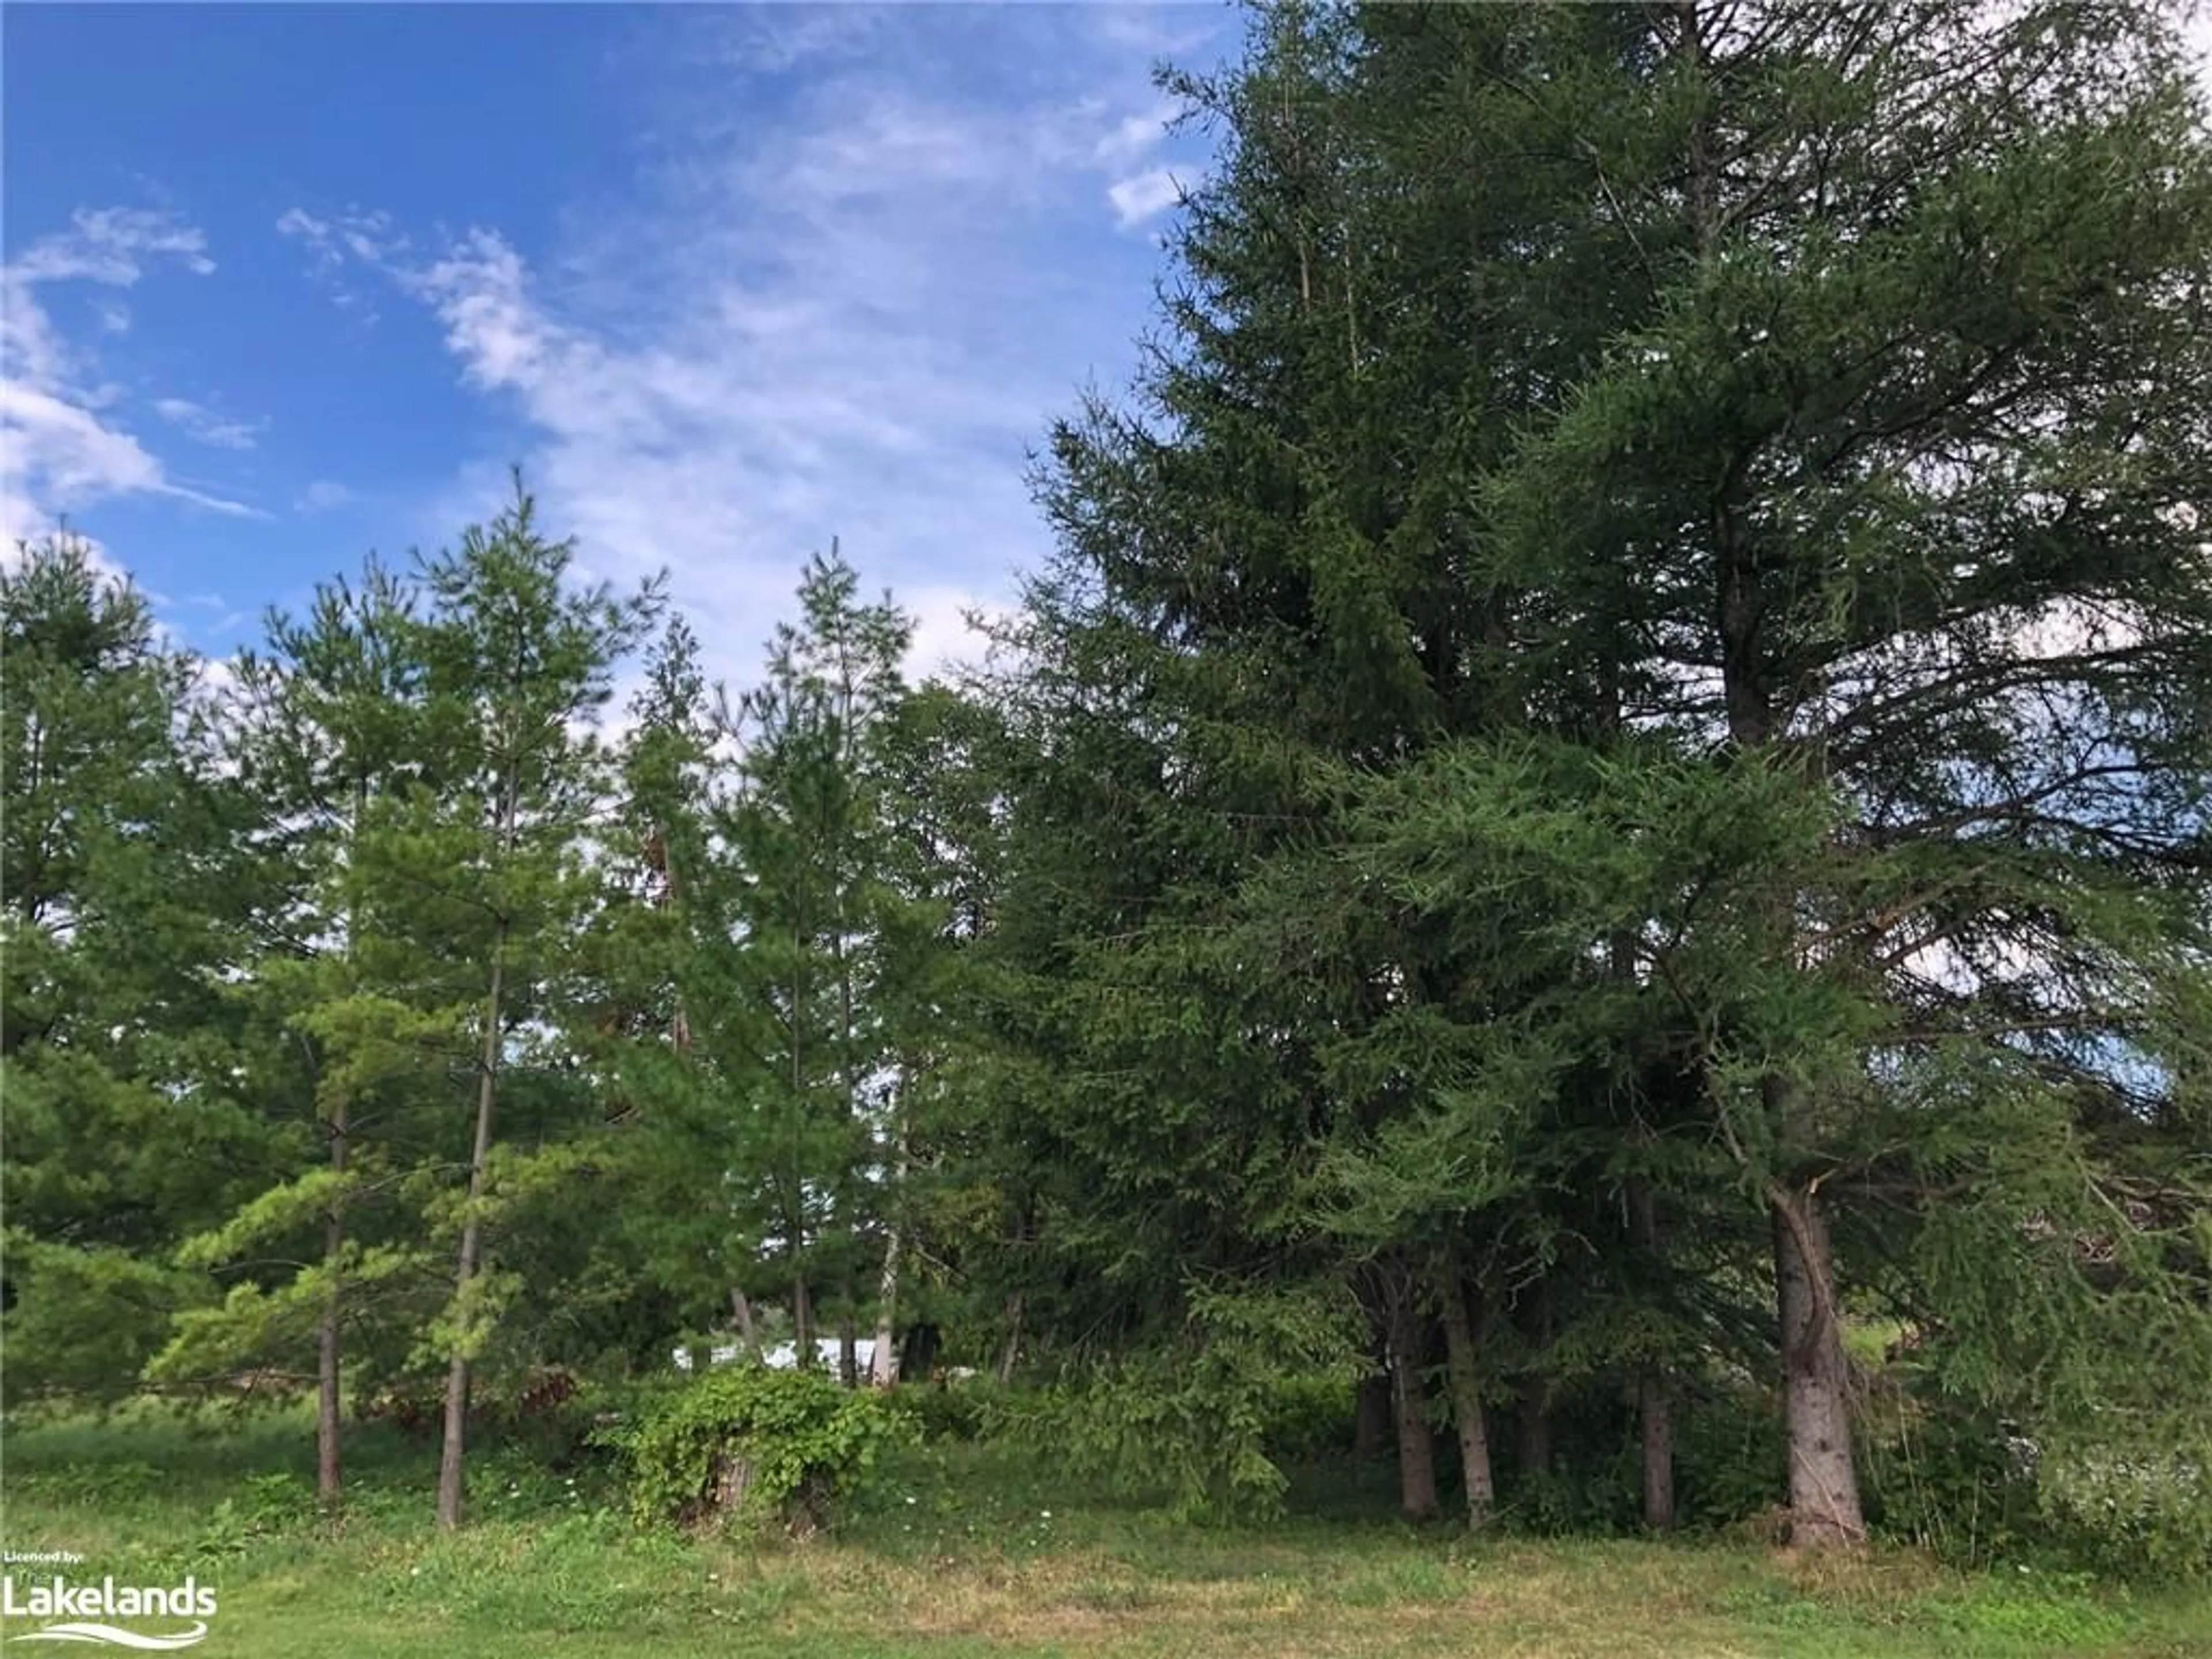 Forest view for 513 Sawmill Rd, Warsaw Ontario K0L 2H0